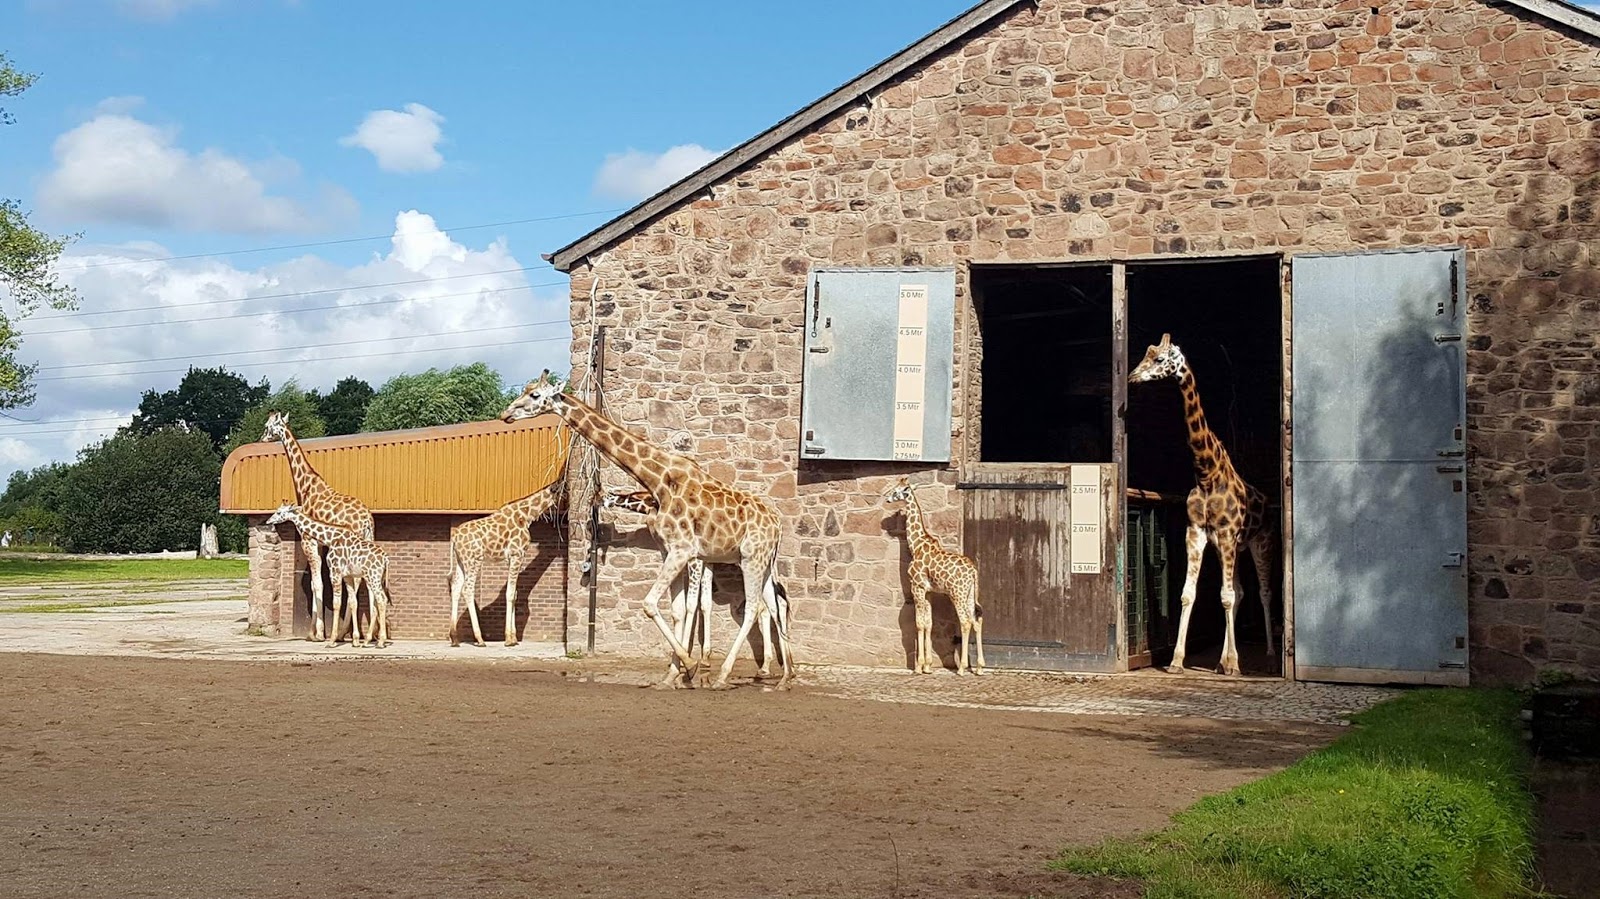 It's A Family Adventure!: It's Time to Play! at Chester Zoo